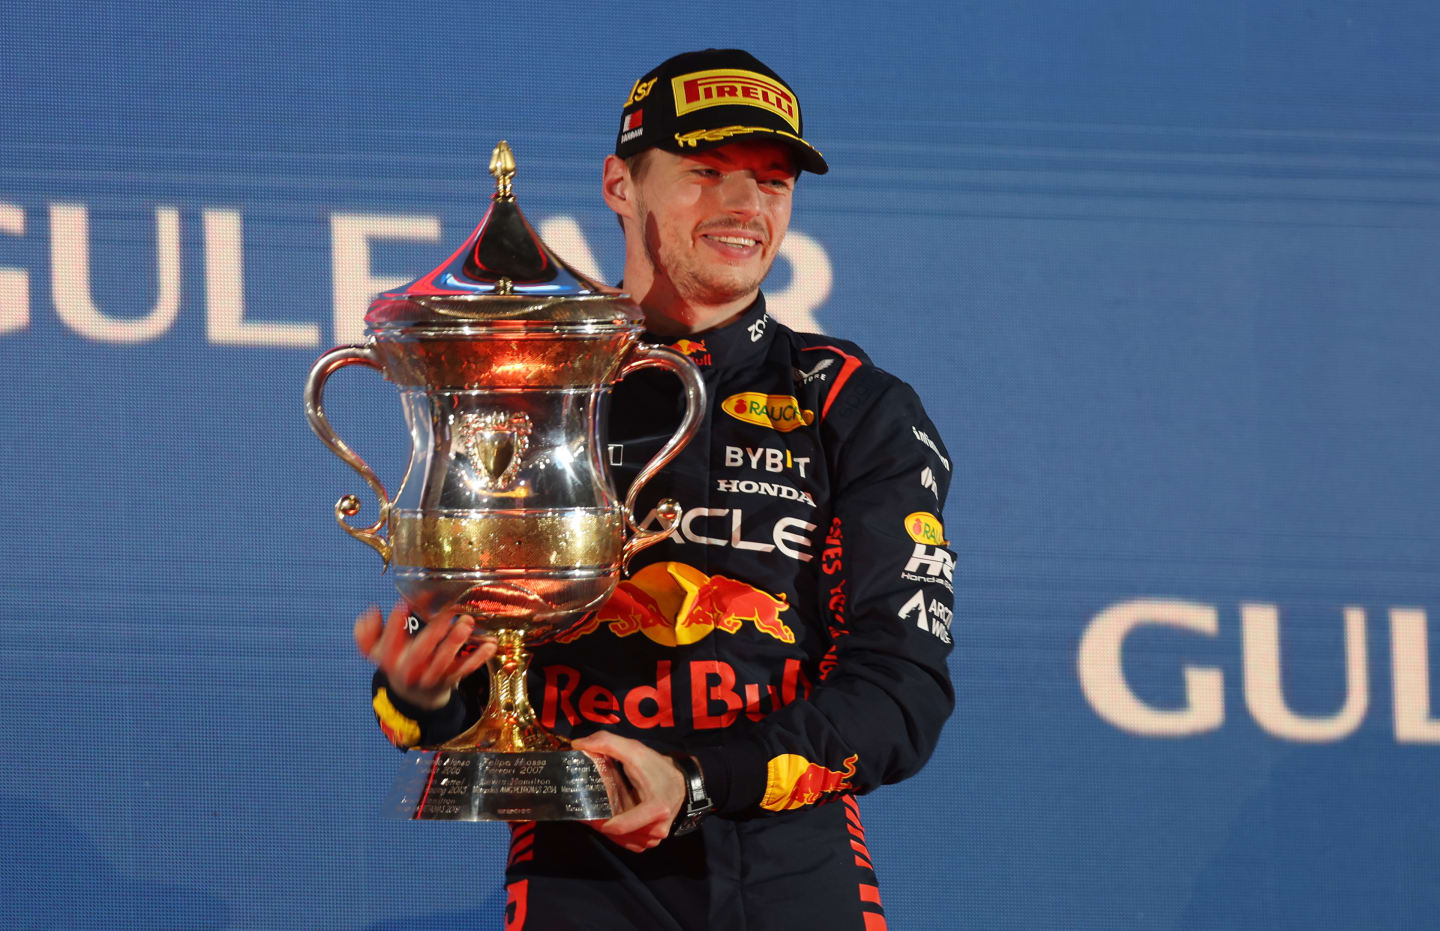 BAHRAIN, BAHRAIN - MARCH 05: Race winner Max Verstappen of the Netherlands and Oracle Red Bull Racing celebrates on the podium during the F1 Grand Prix of Bahrain at Bahrain International Circuit on March 05, 2023 in Bahrain, Bahrain. (Photo by Lars Baron/Getty Images)